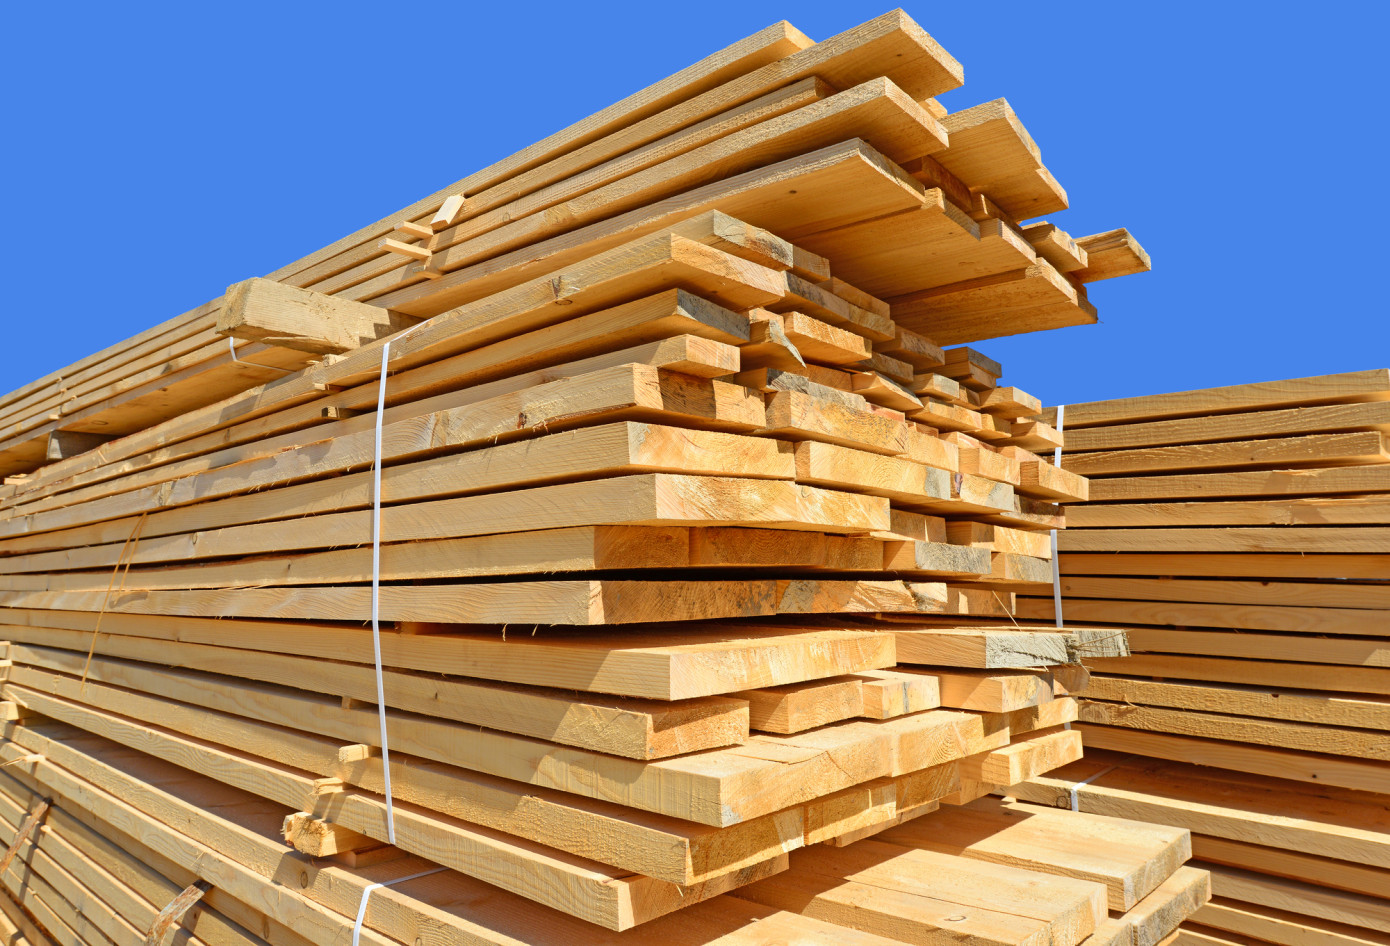 Canadian ministers express disappointment over U.S. decision on Canadian softwood lumber duties